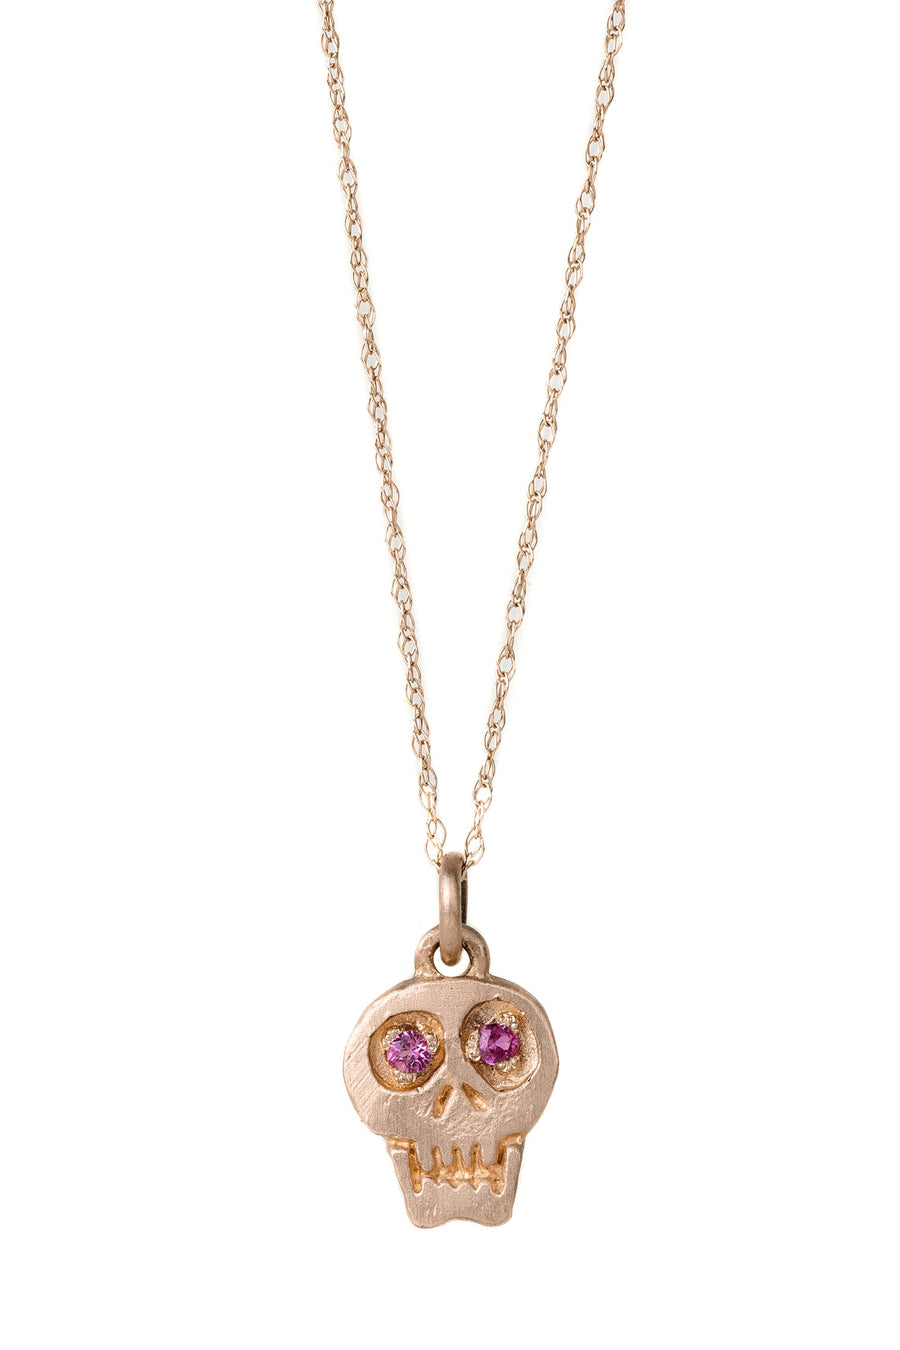 Charmed Skull Hot Pink Sapphire Necklace - 14k Gold